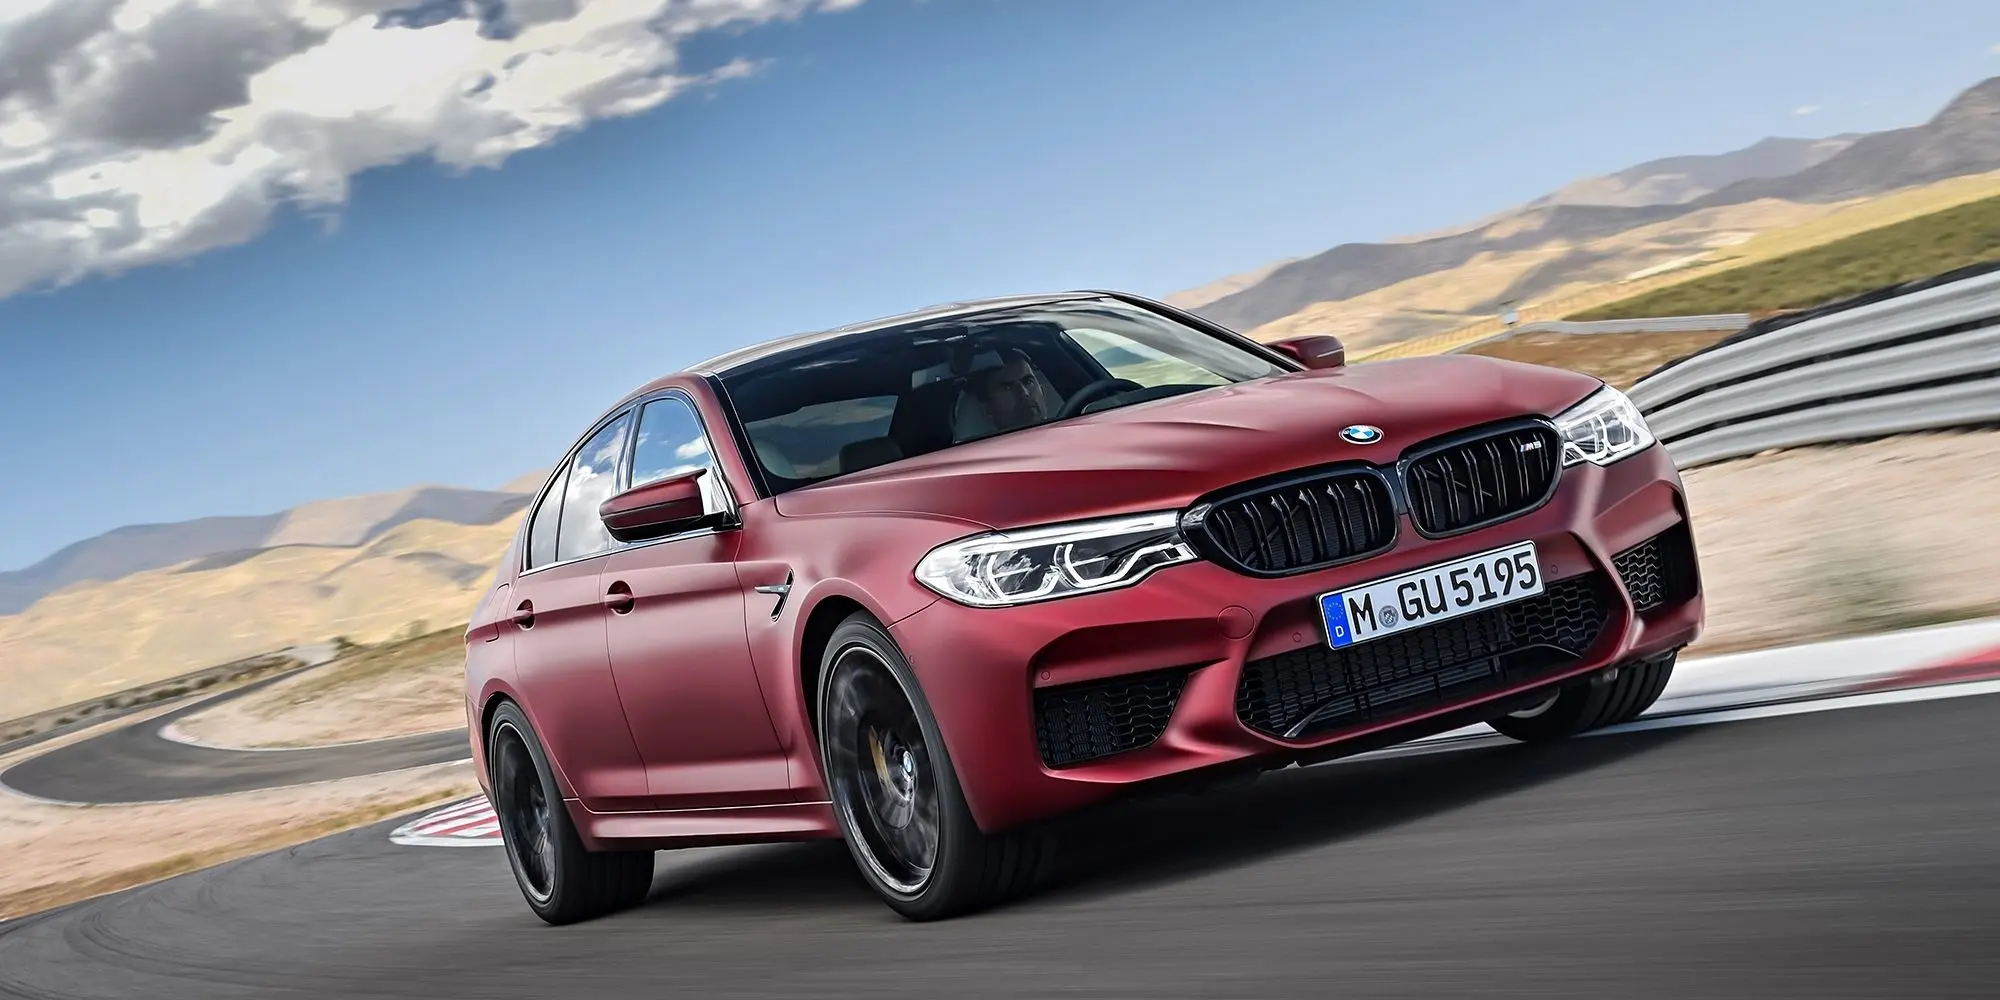 2018 BMW M5: Here It Is, With 600 HP and All-Wheel Drive